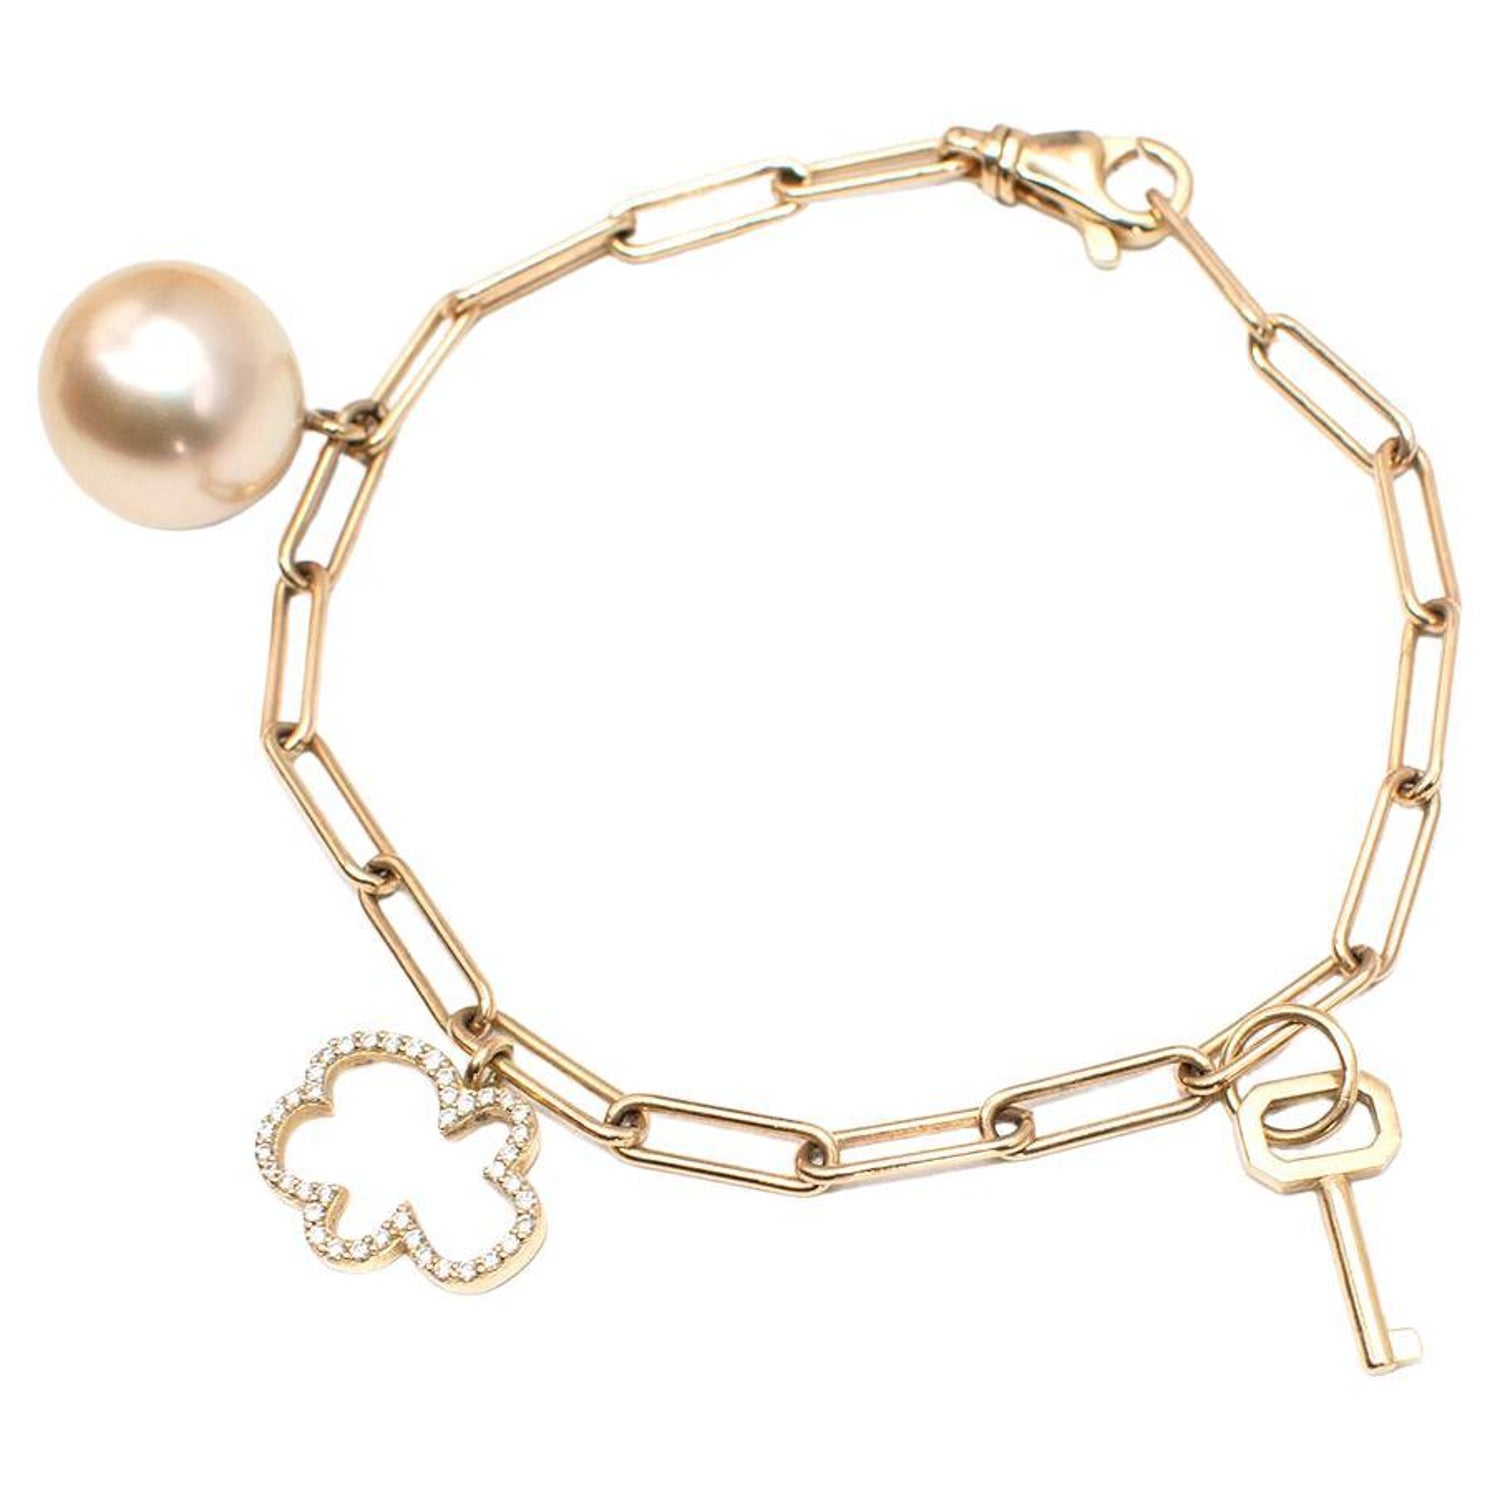 Louis Vuitton Gold Seed Pearl Chain Charm Bracelet, All Designers